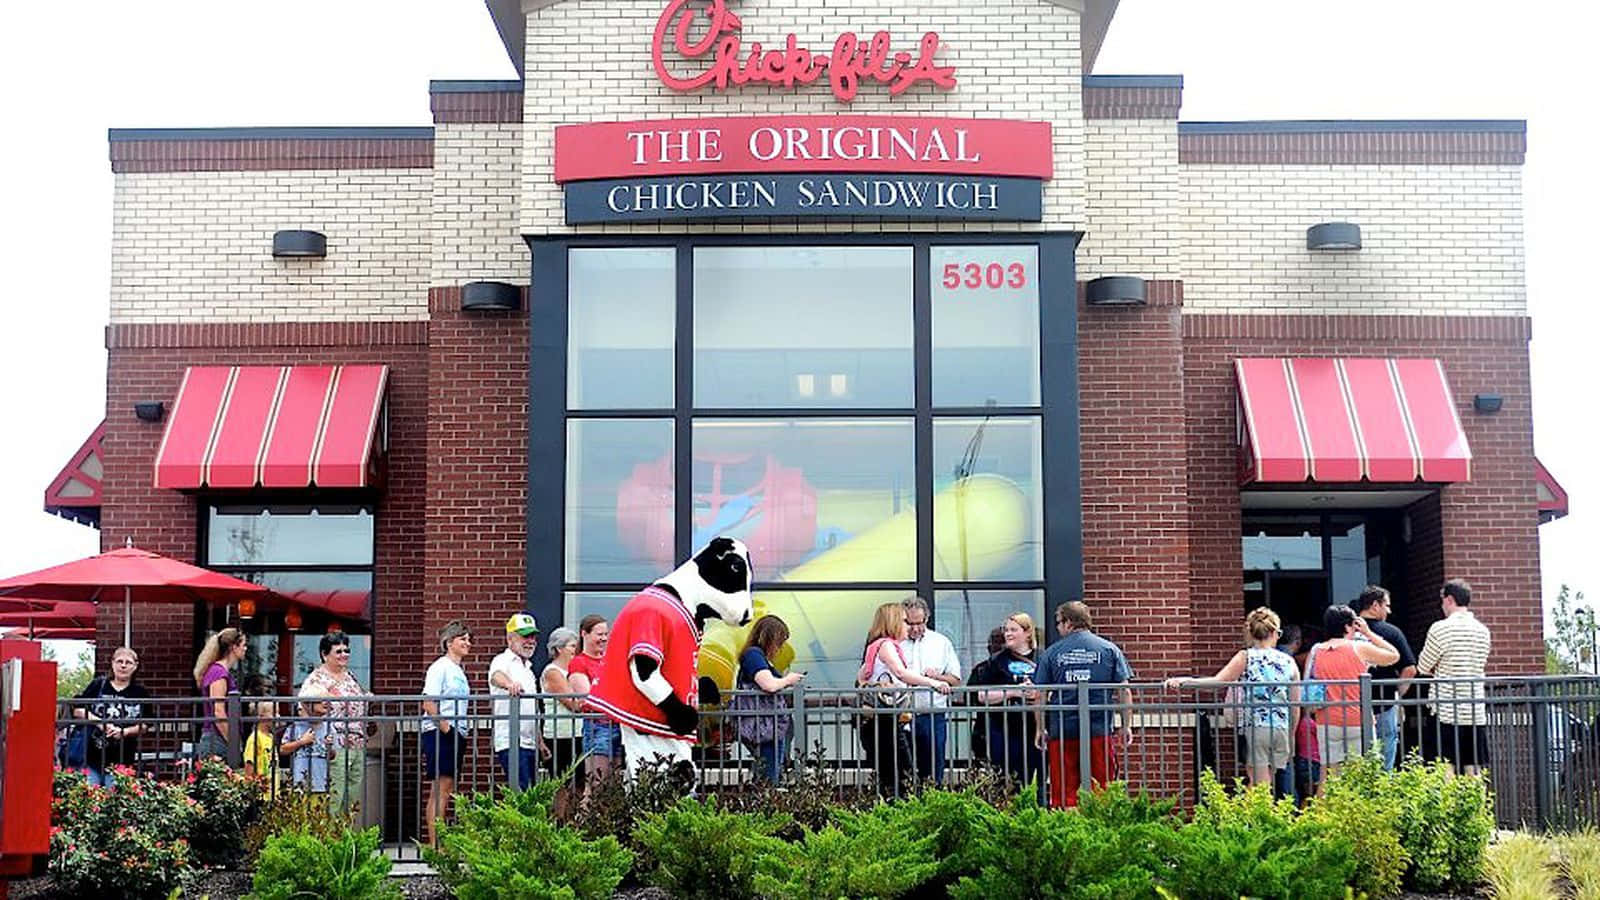 A Group Of People Are Standing Outside Of A Chick-fil-a Restaurant